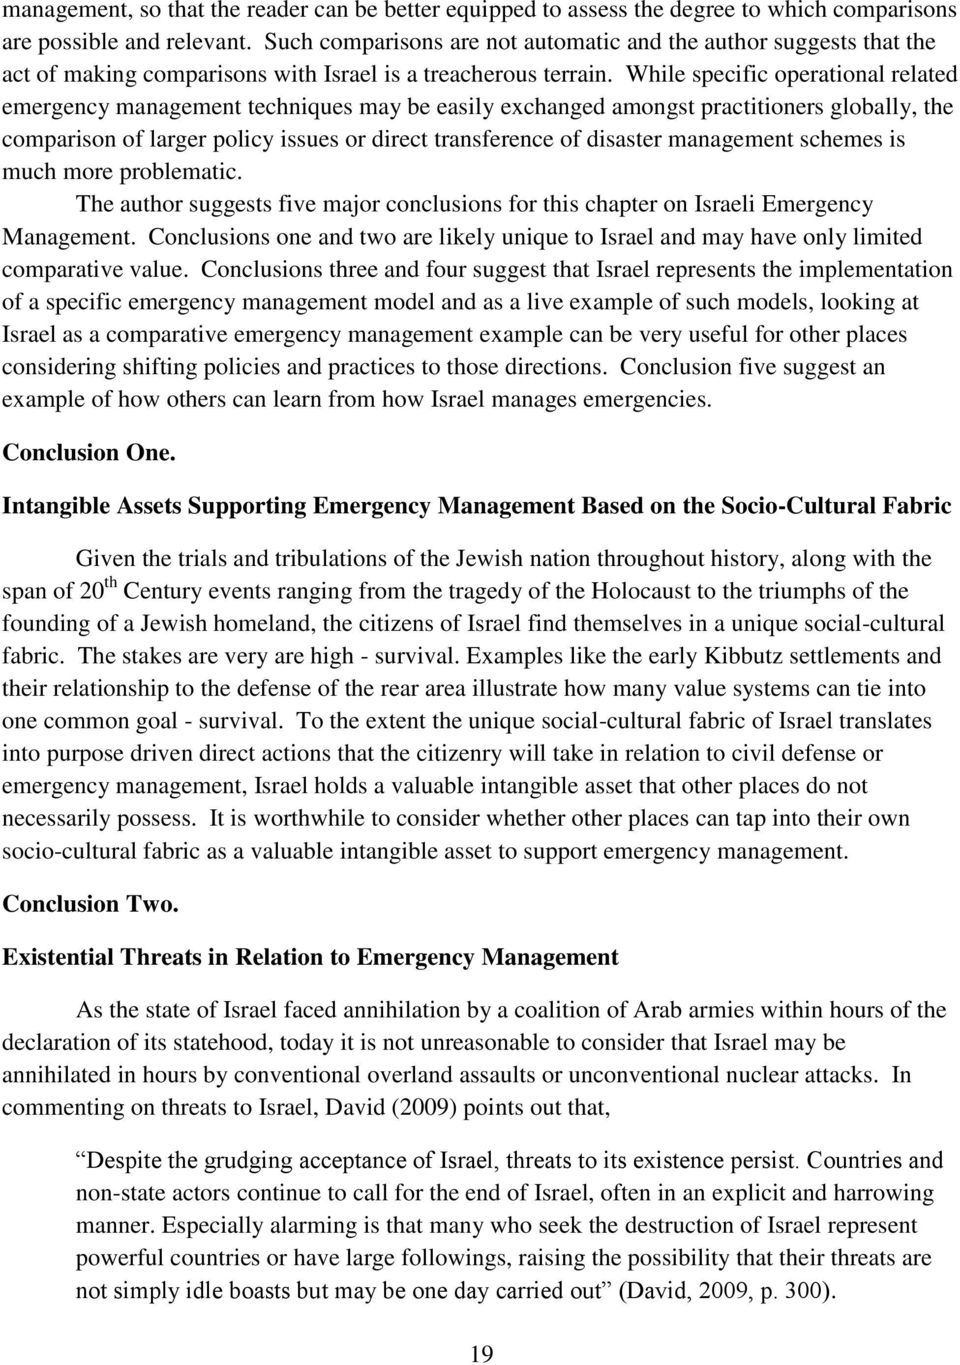 While specific operational related emergency management techniques may be easily exchanged amongst practitioners globally, the comparison of larger policy issues or direct transference of disaster